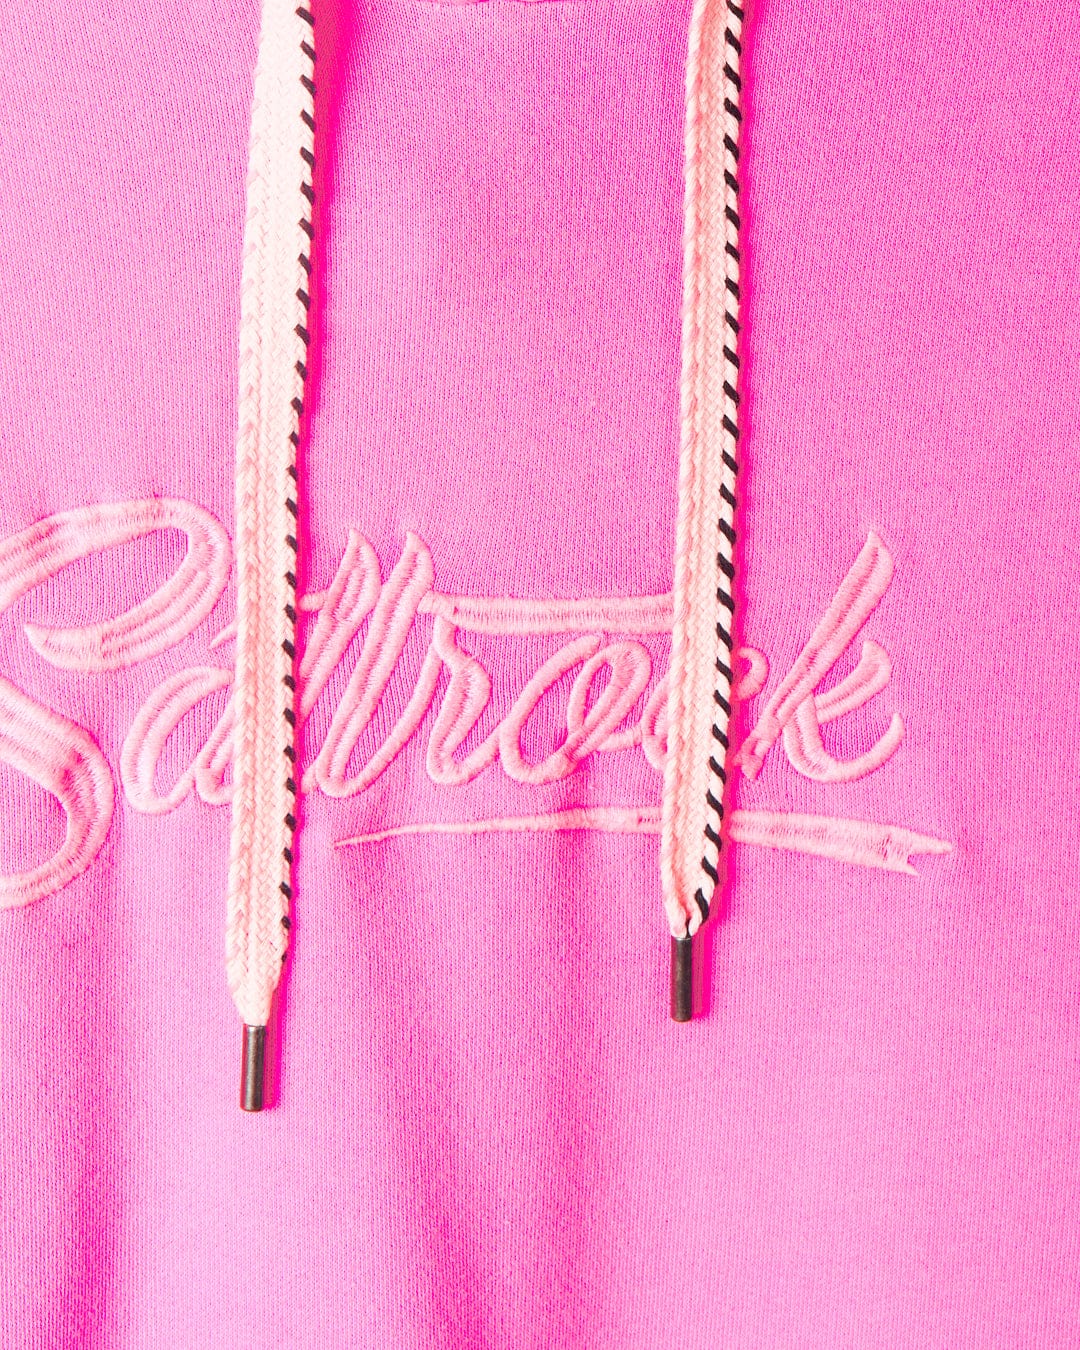 Close-up of a Saltrock branded Instow - Womens Pop Hoodie - Pink with white drawstrings and cursive embroidered text that reads "Saltrock." Made from 100% cotton for ultimate comfort.